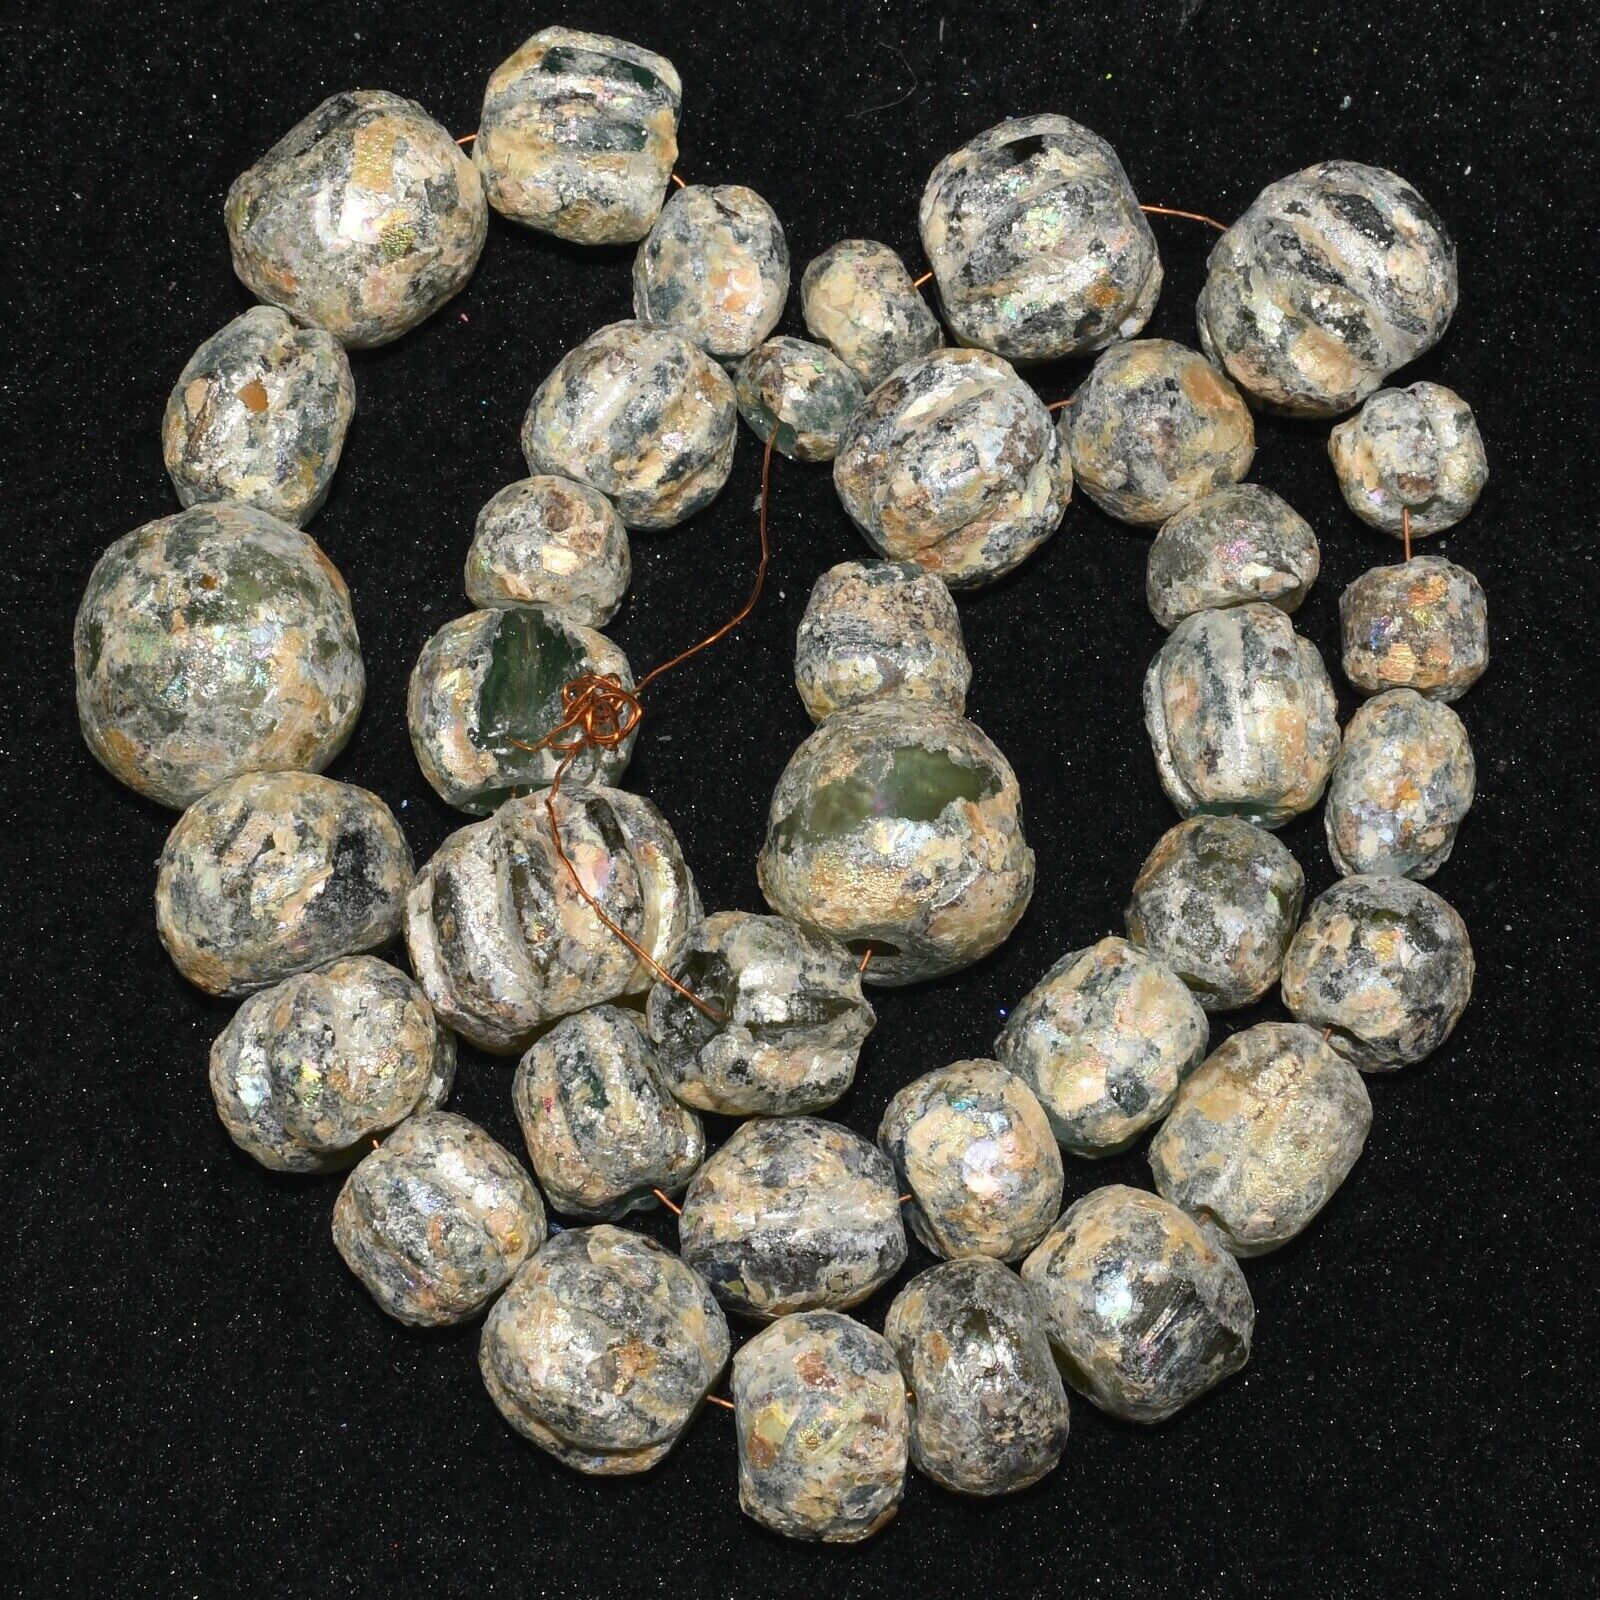 Genuine Ancient Large Roman Glass Beads Necklace Circa 1st - 2nd Century AD